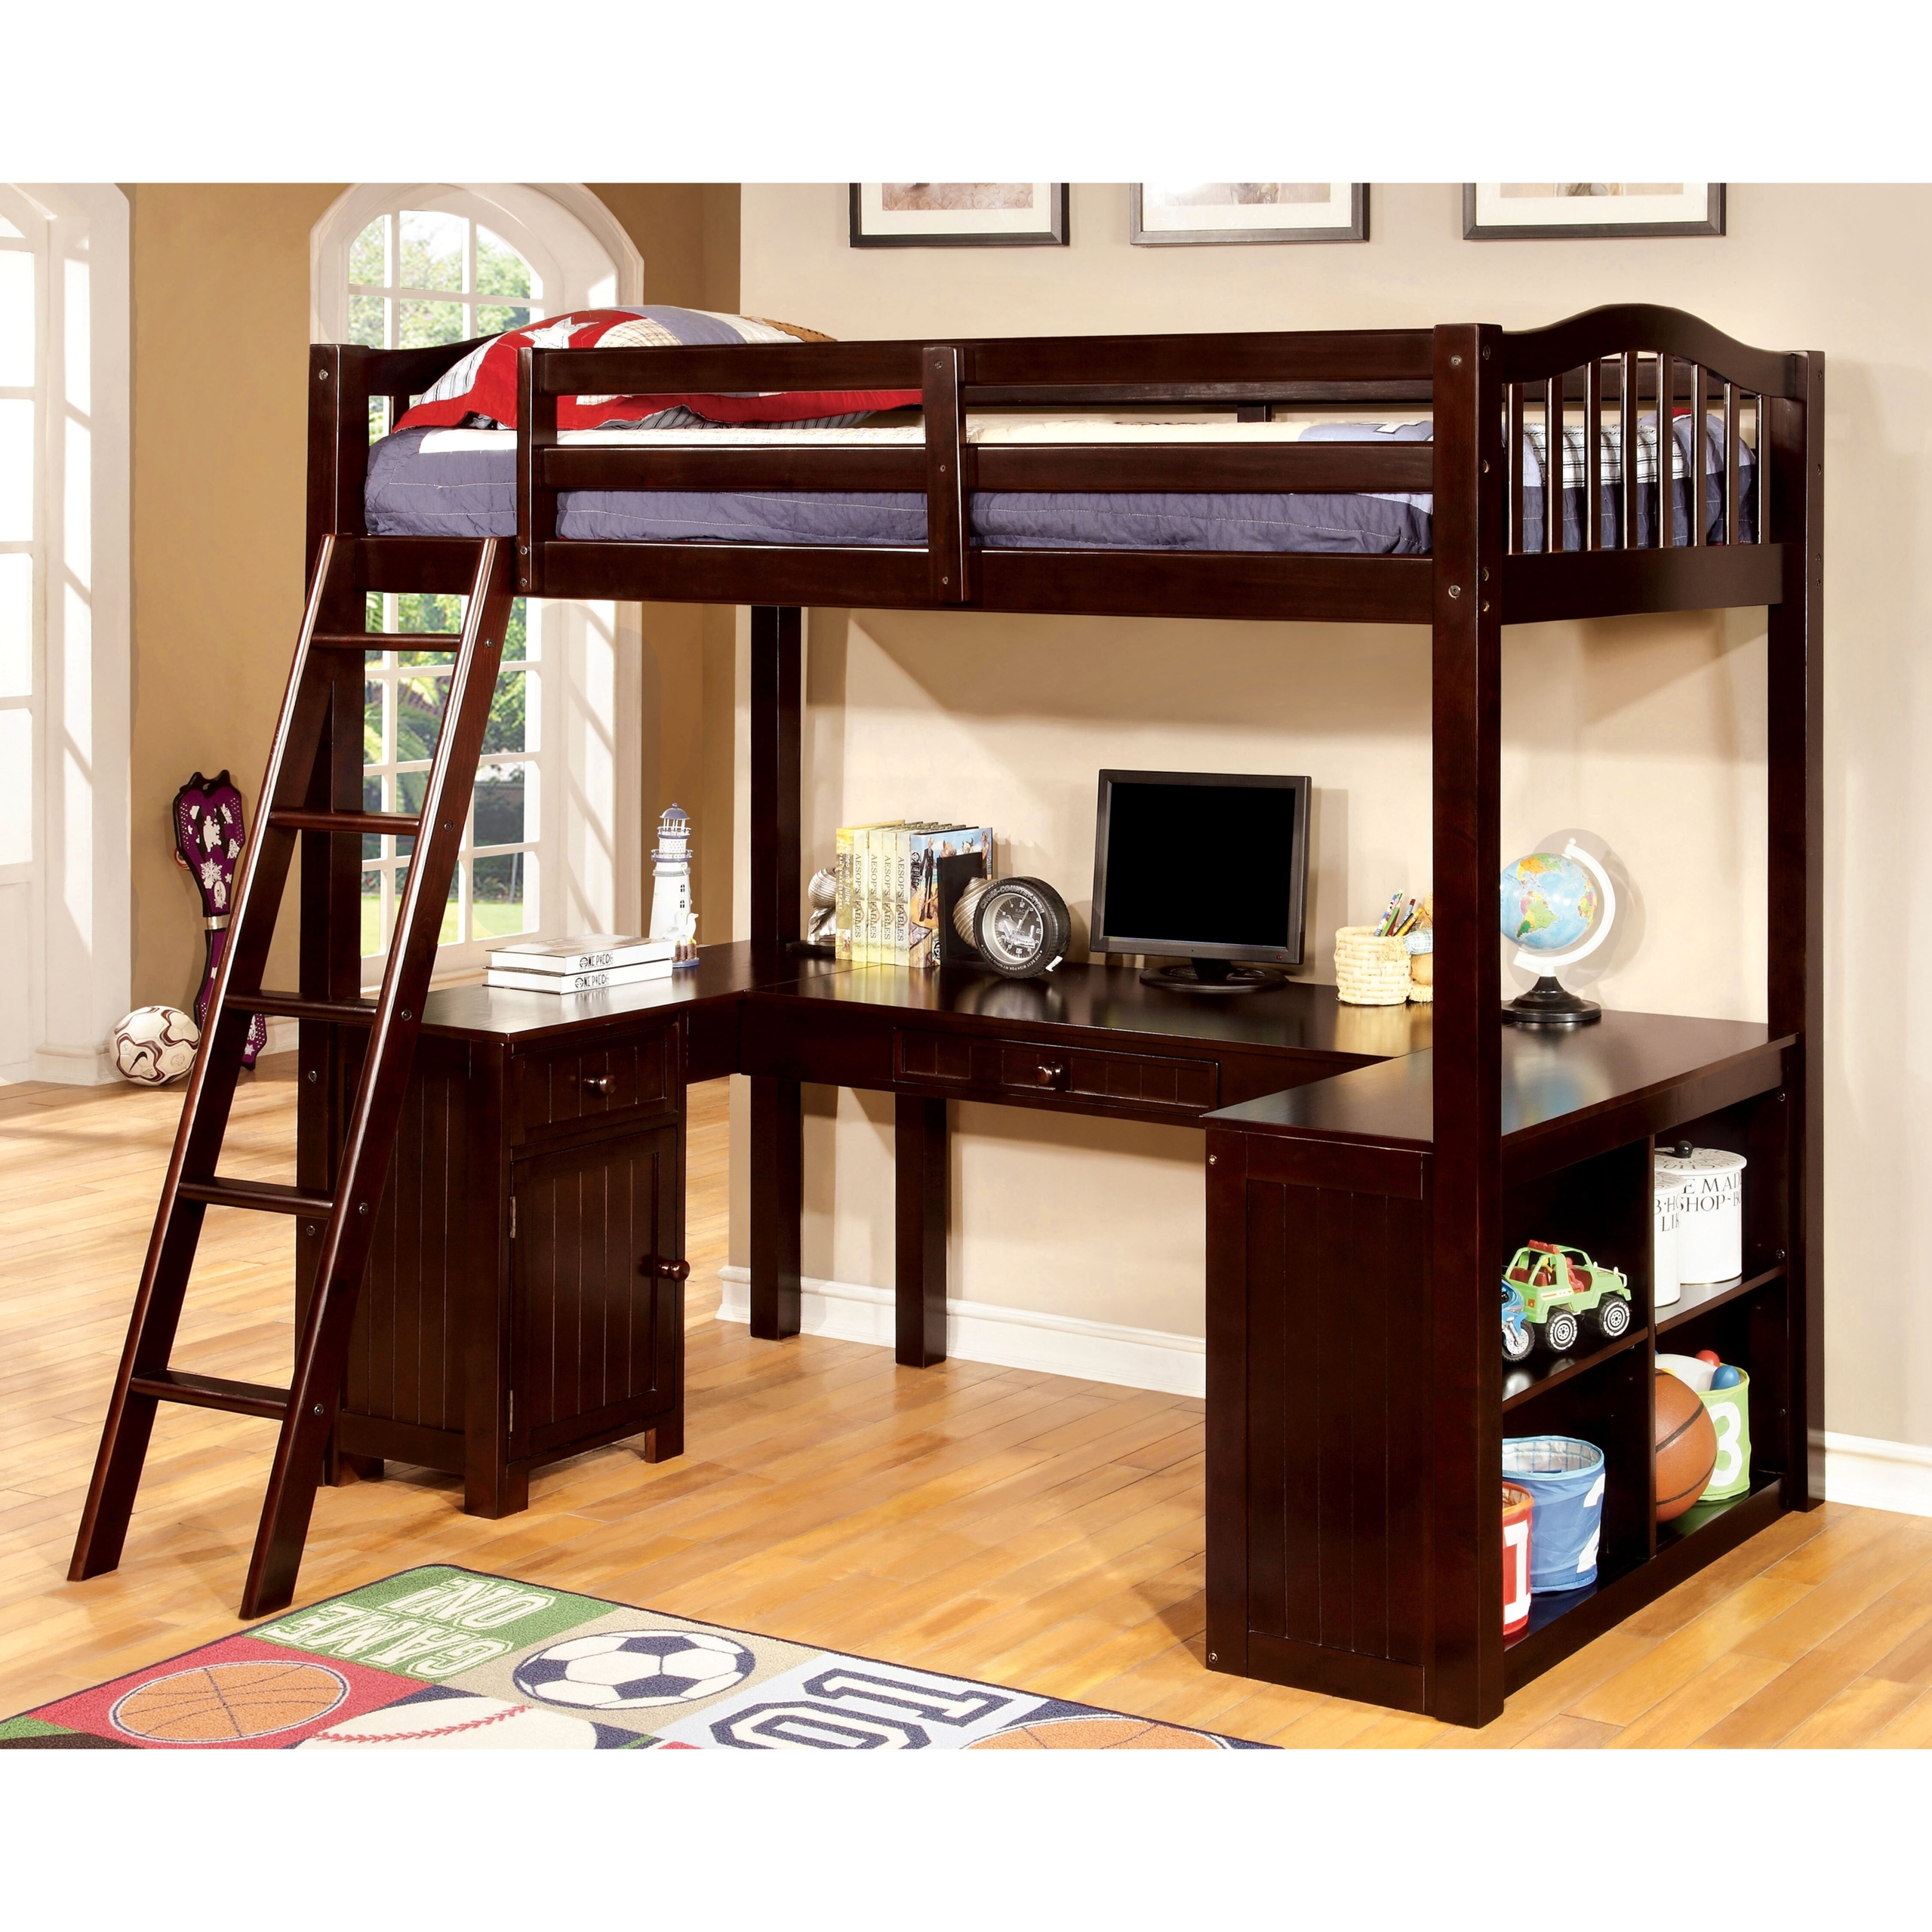 Wood bunk bed with desk underneath 3